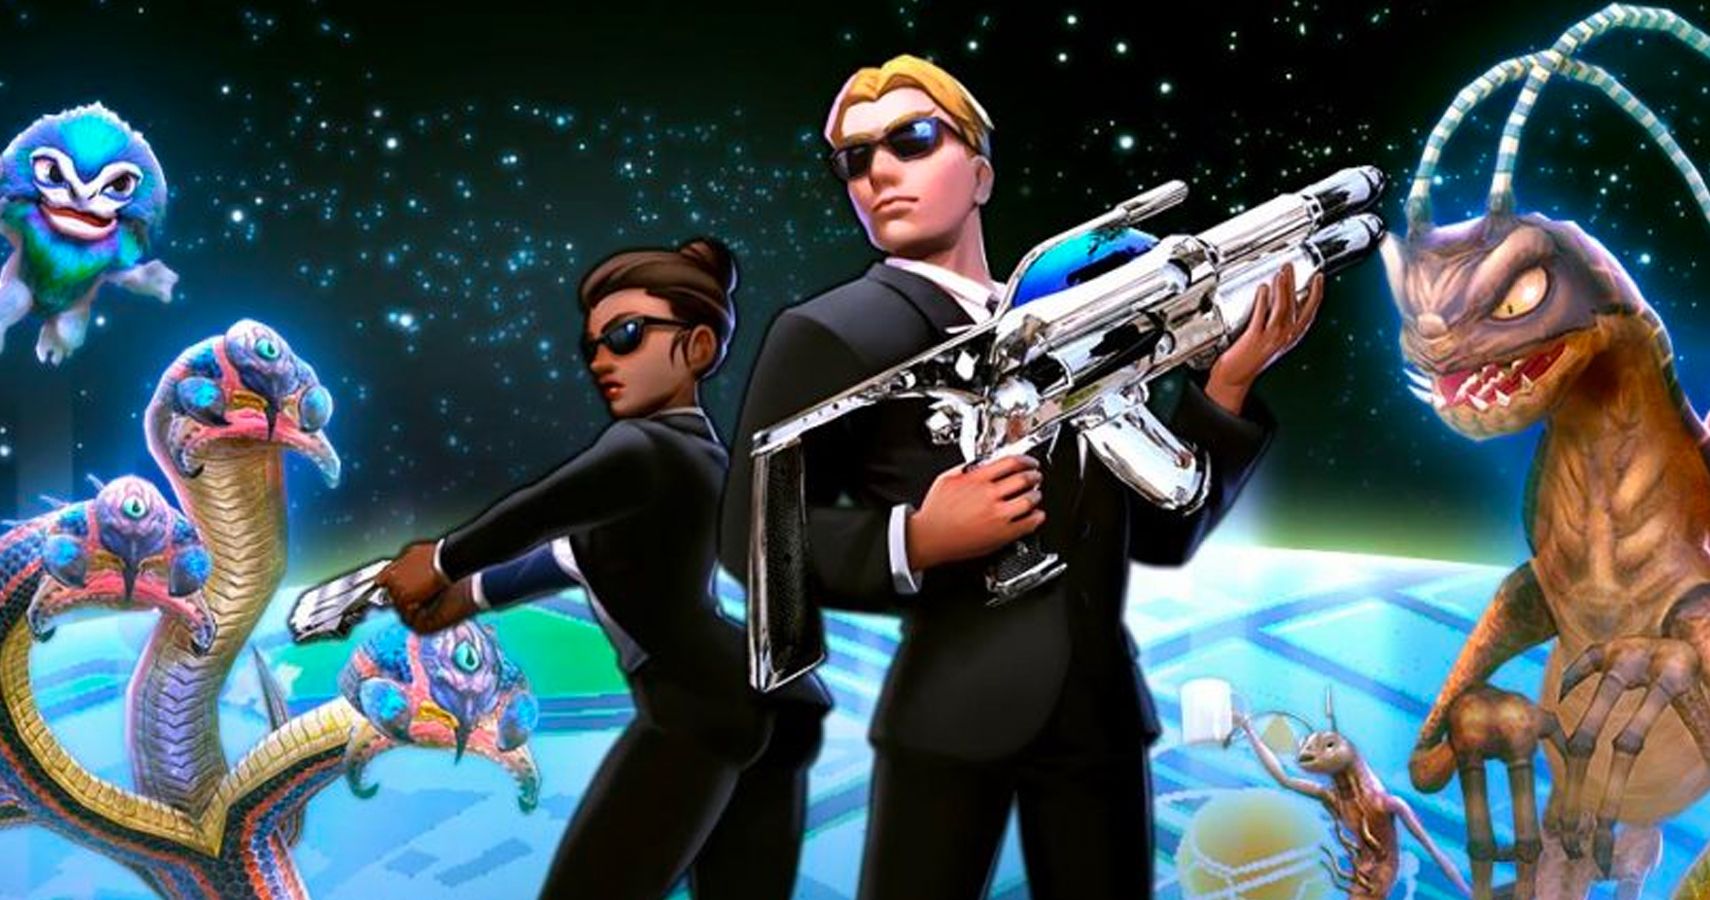 Men In Black Global Invasion Is Another Pokémon GO Clone